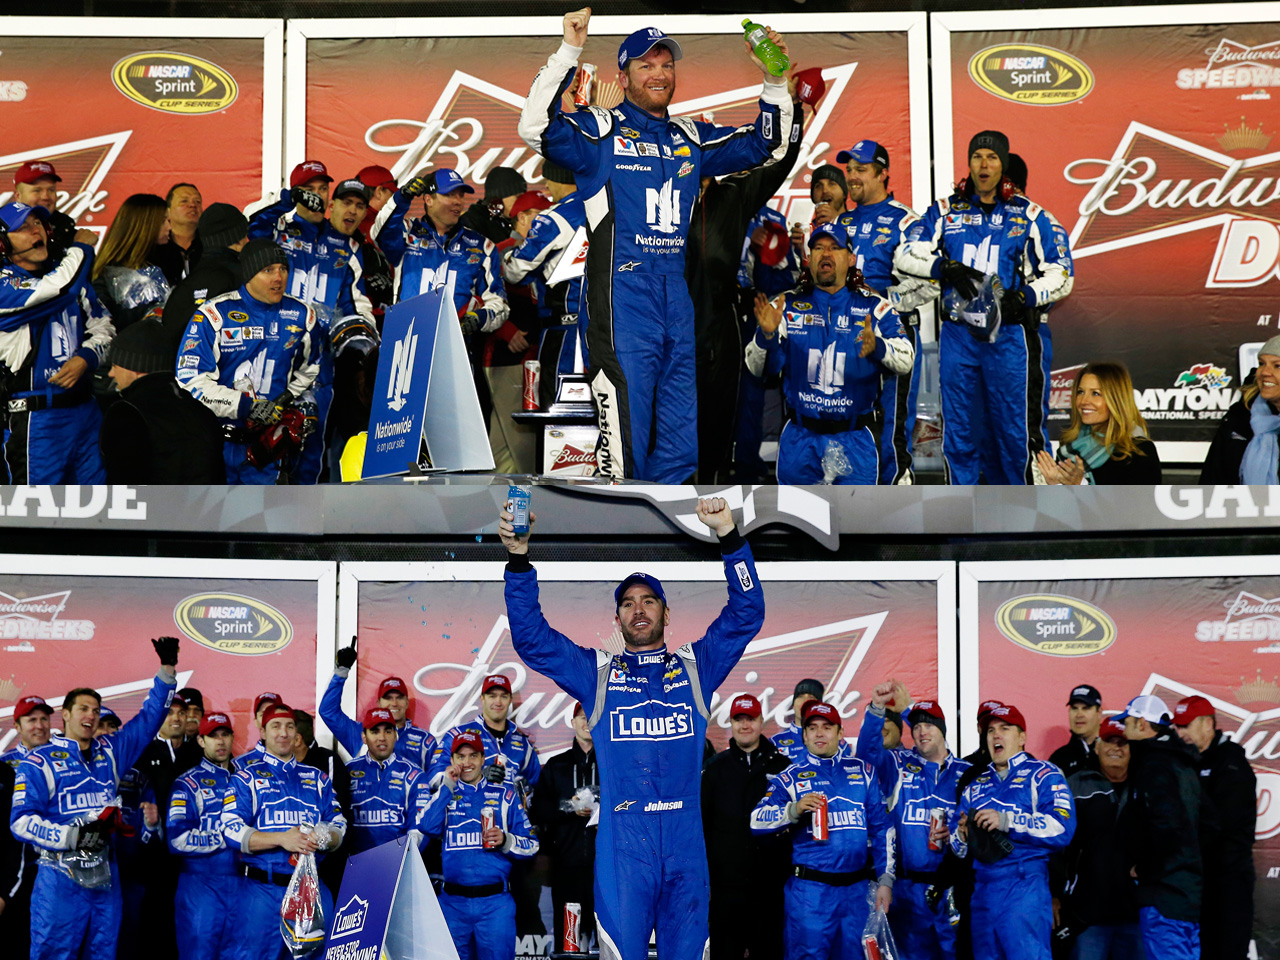 Dale Earnhardt Jr. and Jimmie Johnson won their respective Duel races, giving Hendrick Motorsports a sweep of the first three spots in the Daytona 500.